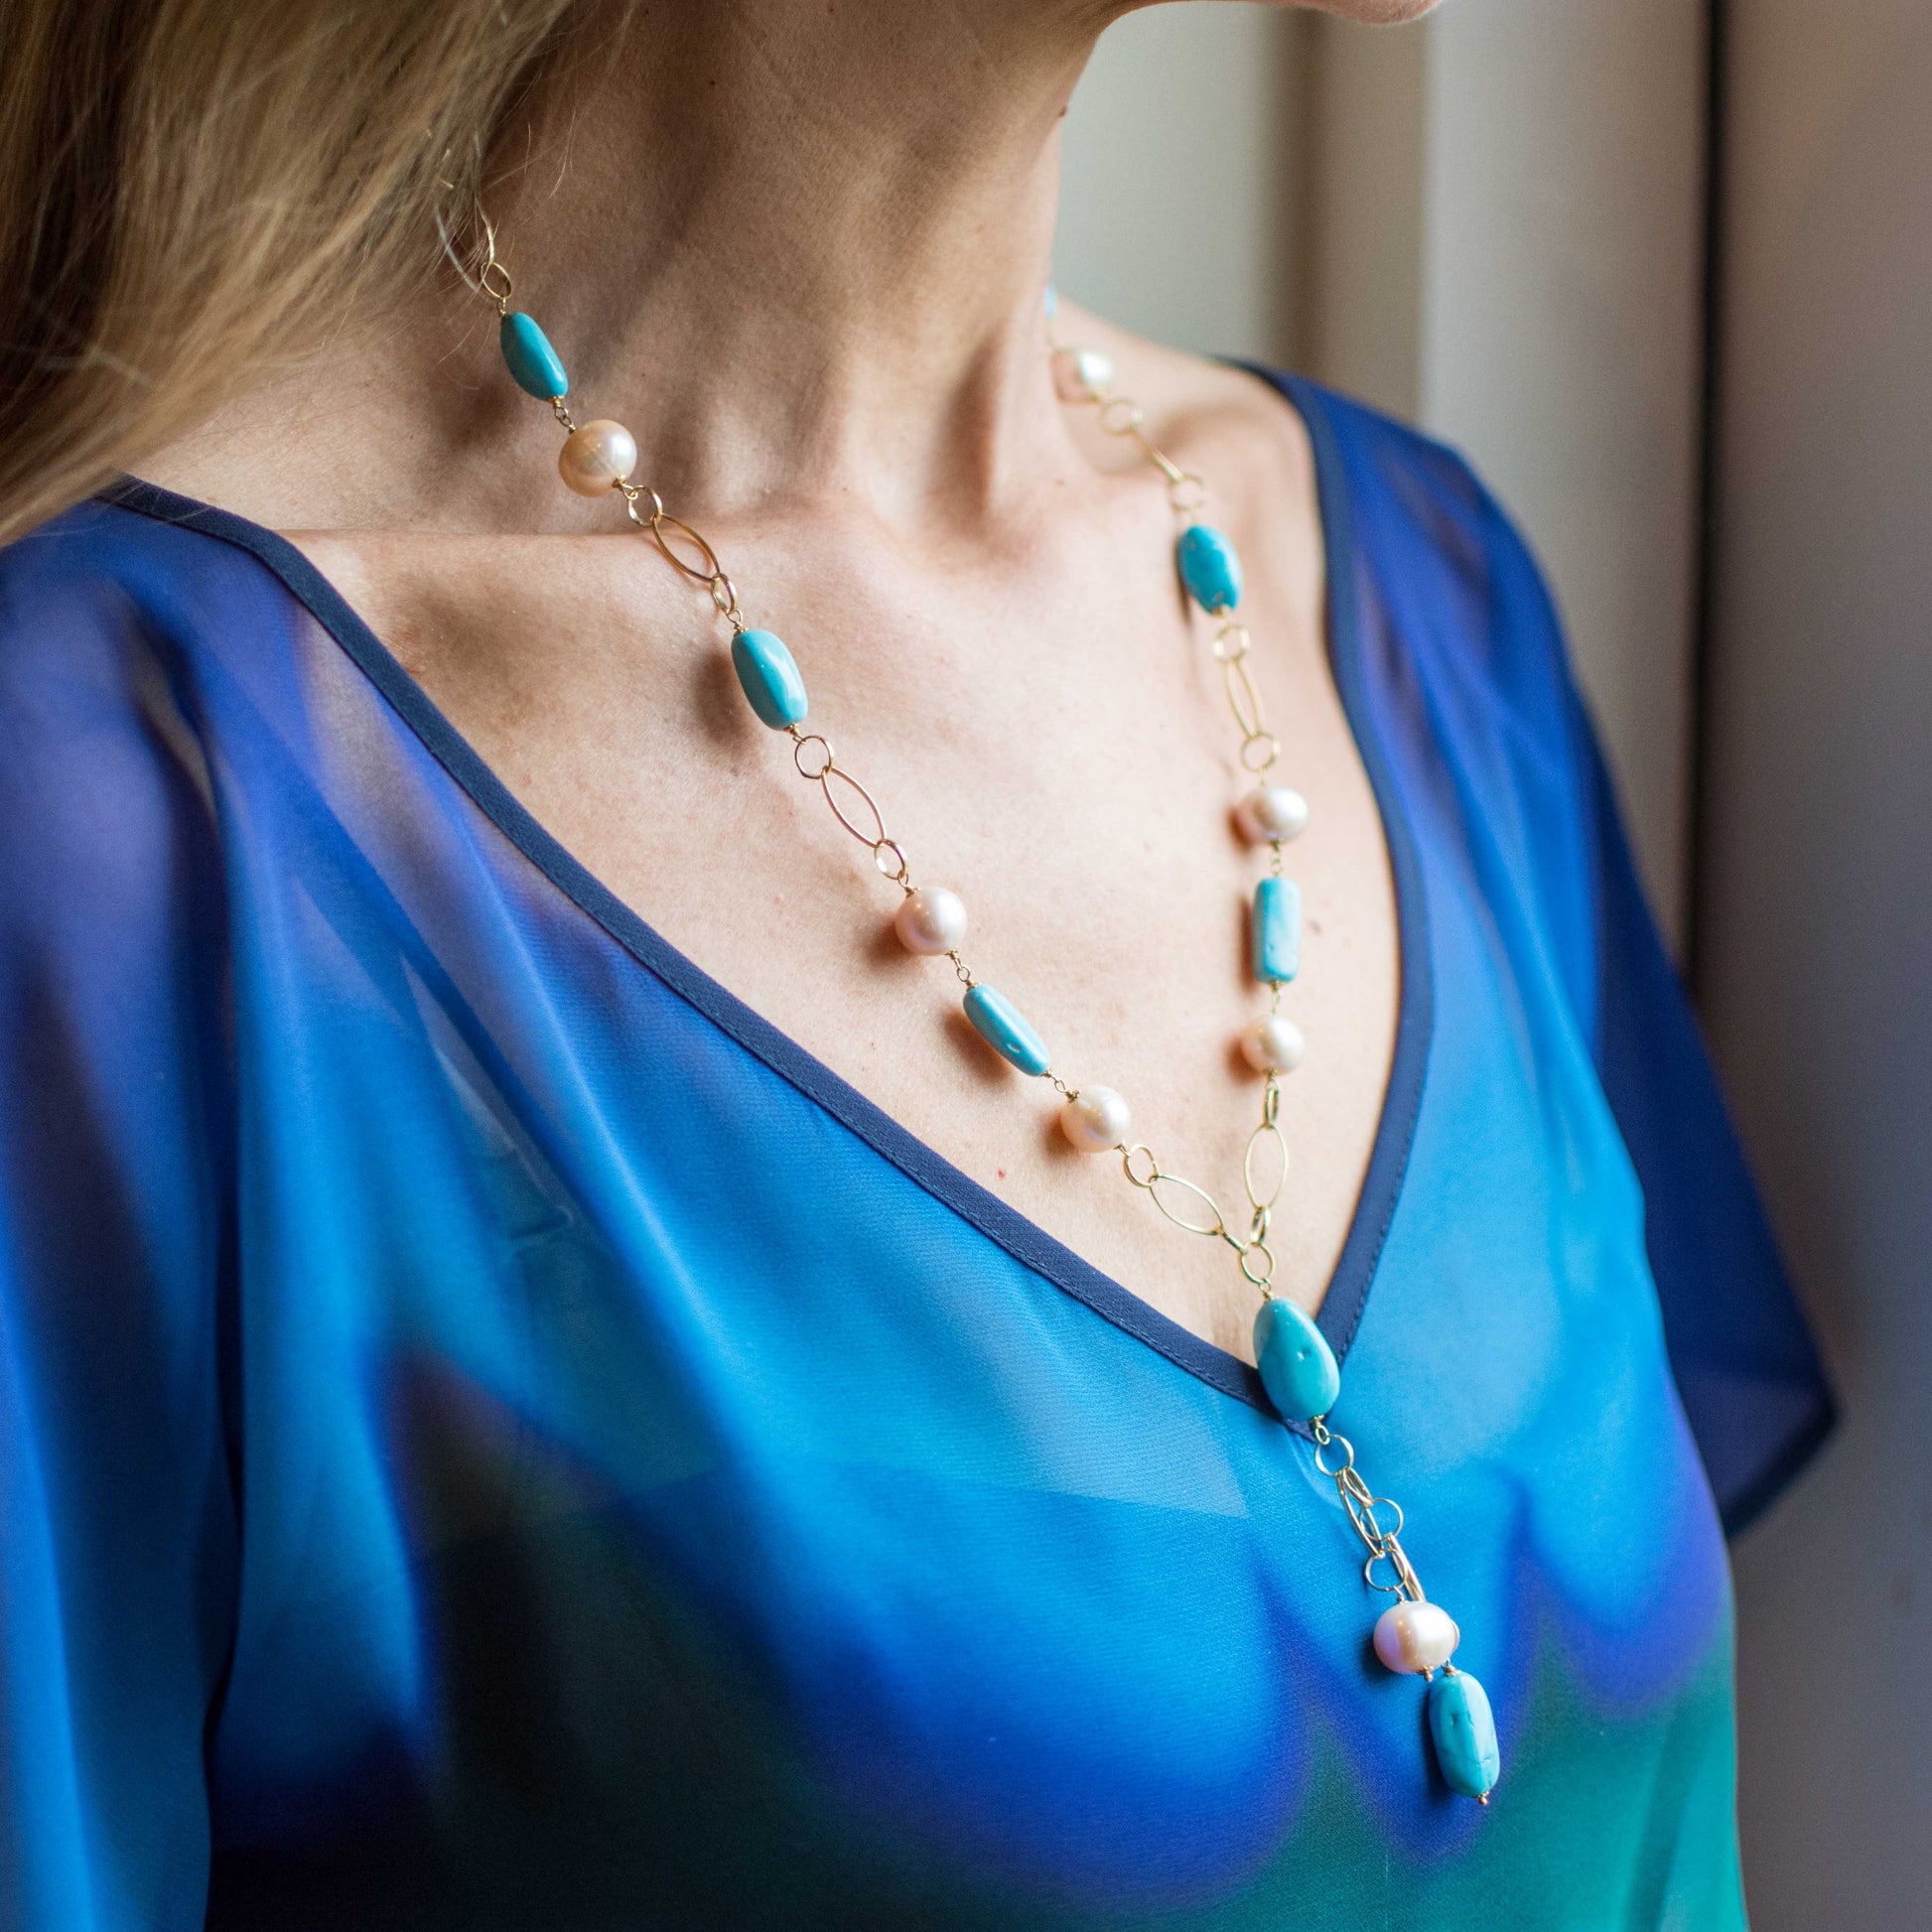 18ct Gold Turquoise and Cultured Freshwater Lariat Necklace 60cm necklace with a 10cm lariat. 18ct yellow gold